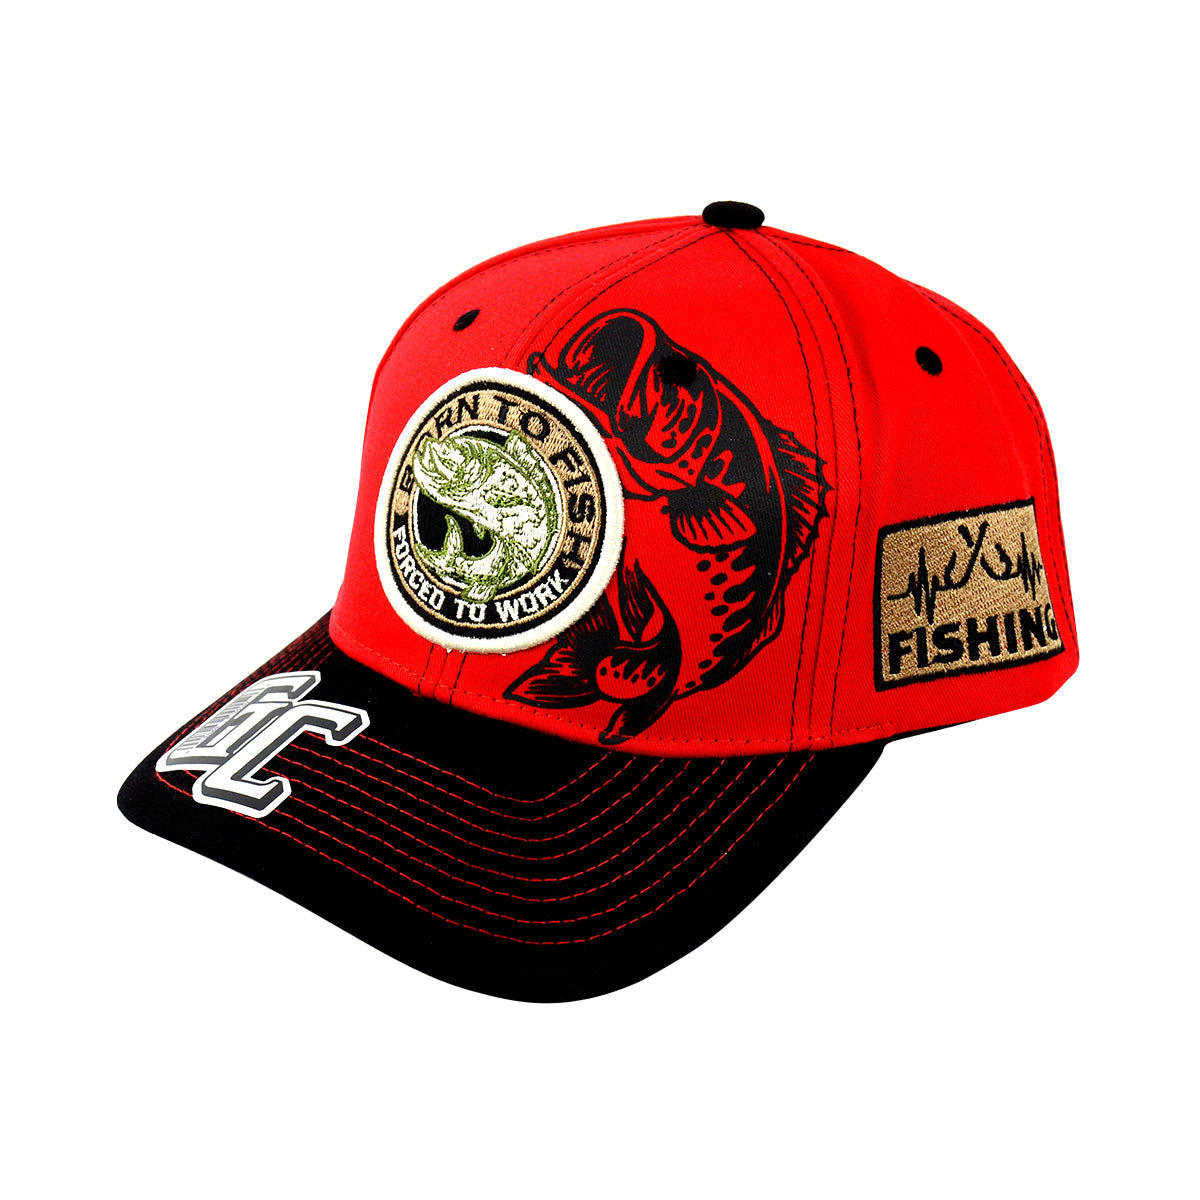 Snapback "Born to Fishing" Hat Embroidered